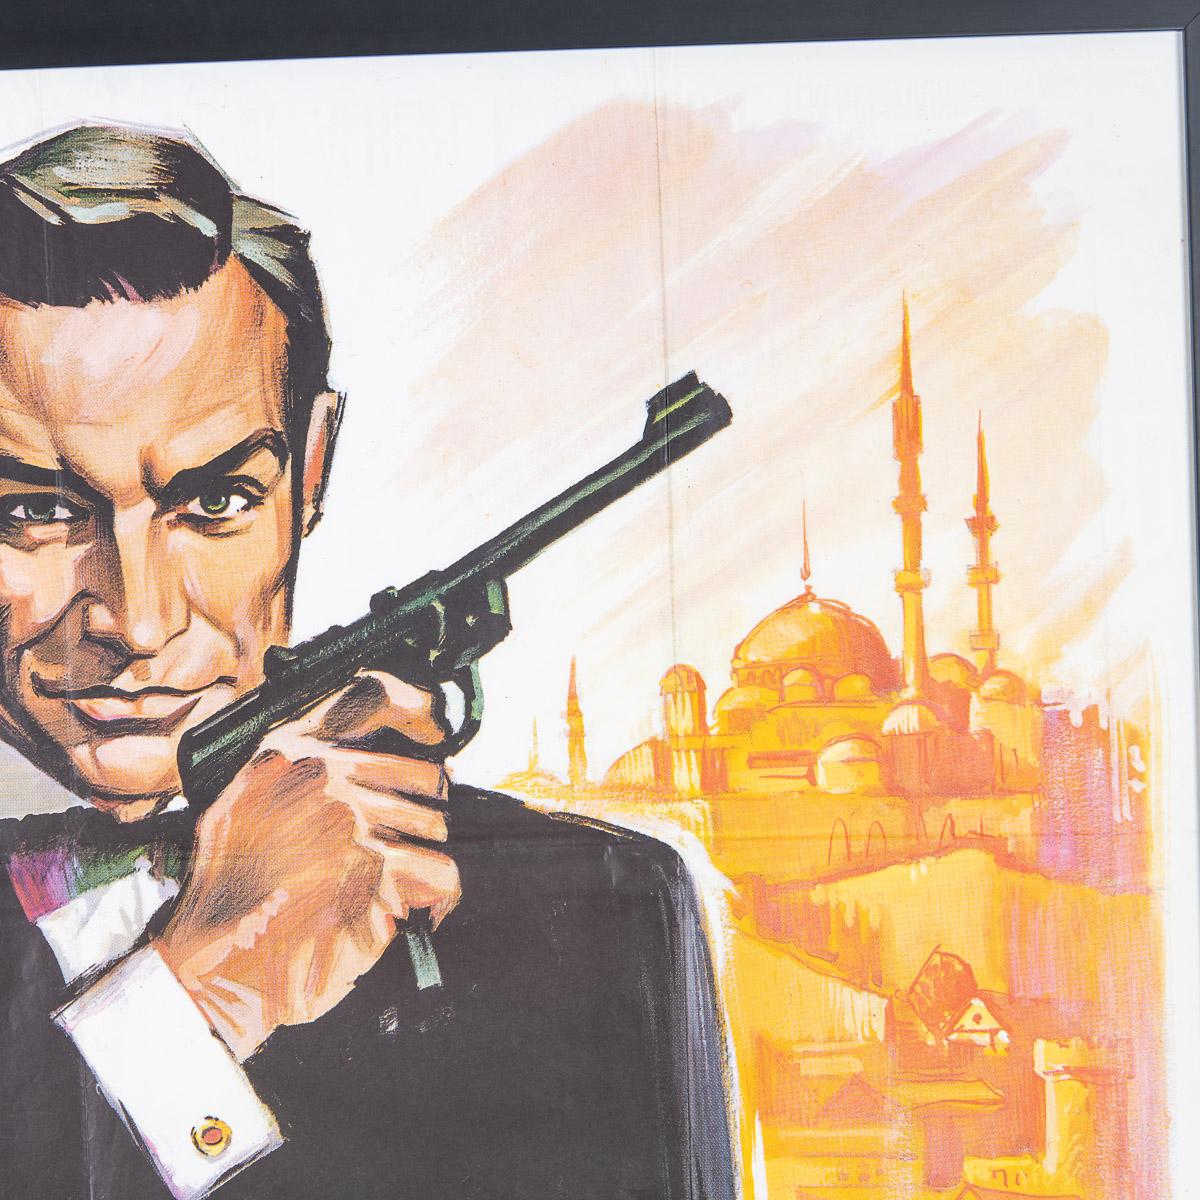 Original French Release James Bond 007 'From Russia With Love' Poster, с.1964 In Good Condition For Sale In Royal Tunbridge Wells, Kent